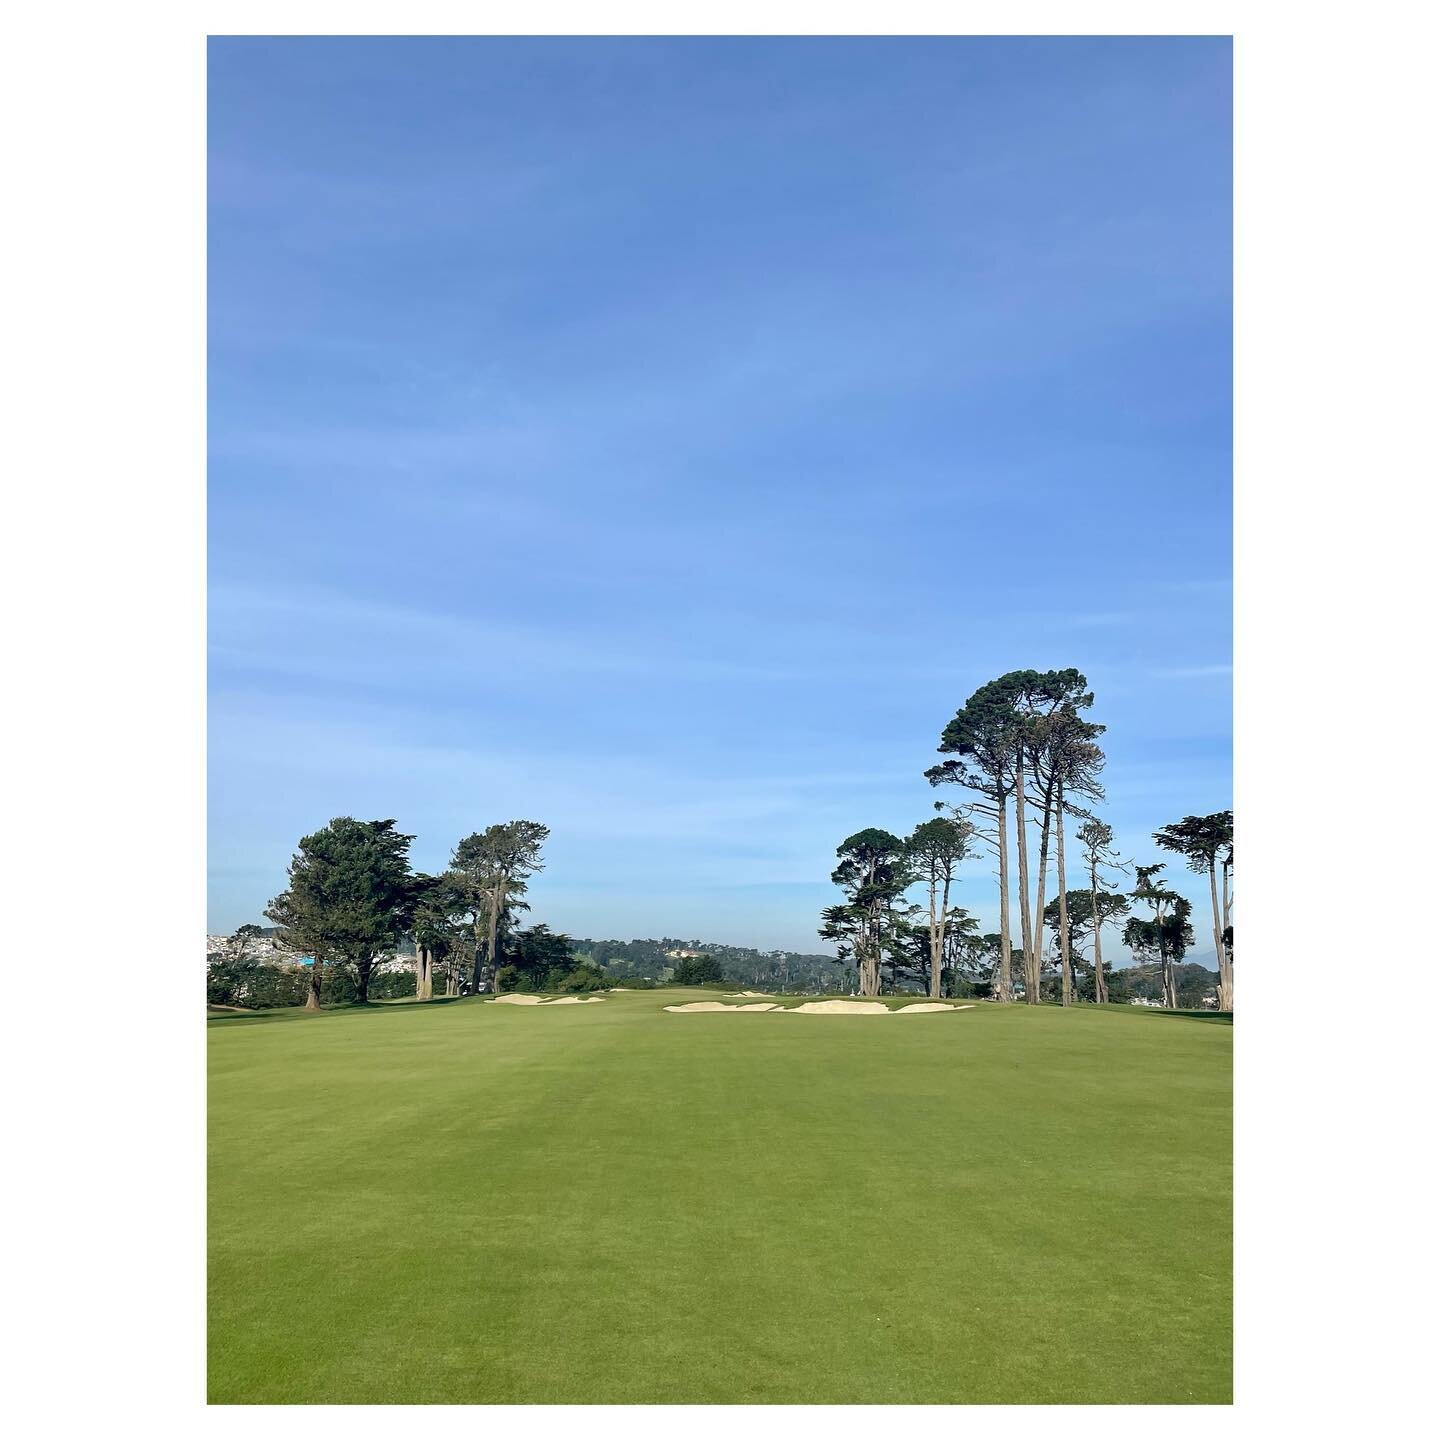 10.31.23 // the 8th at Lake Merced is a beast at almost 600 yards. The long walk staring out towards Olympic Club in the distance can be beautiful, or brutal, depending on how you&rsquo;re hitting it that day.